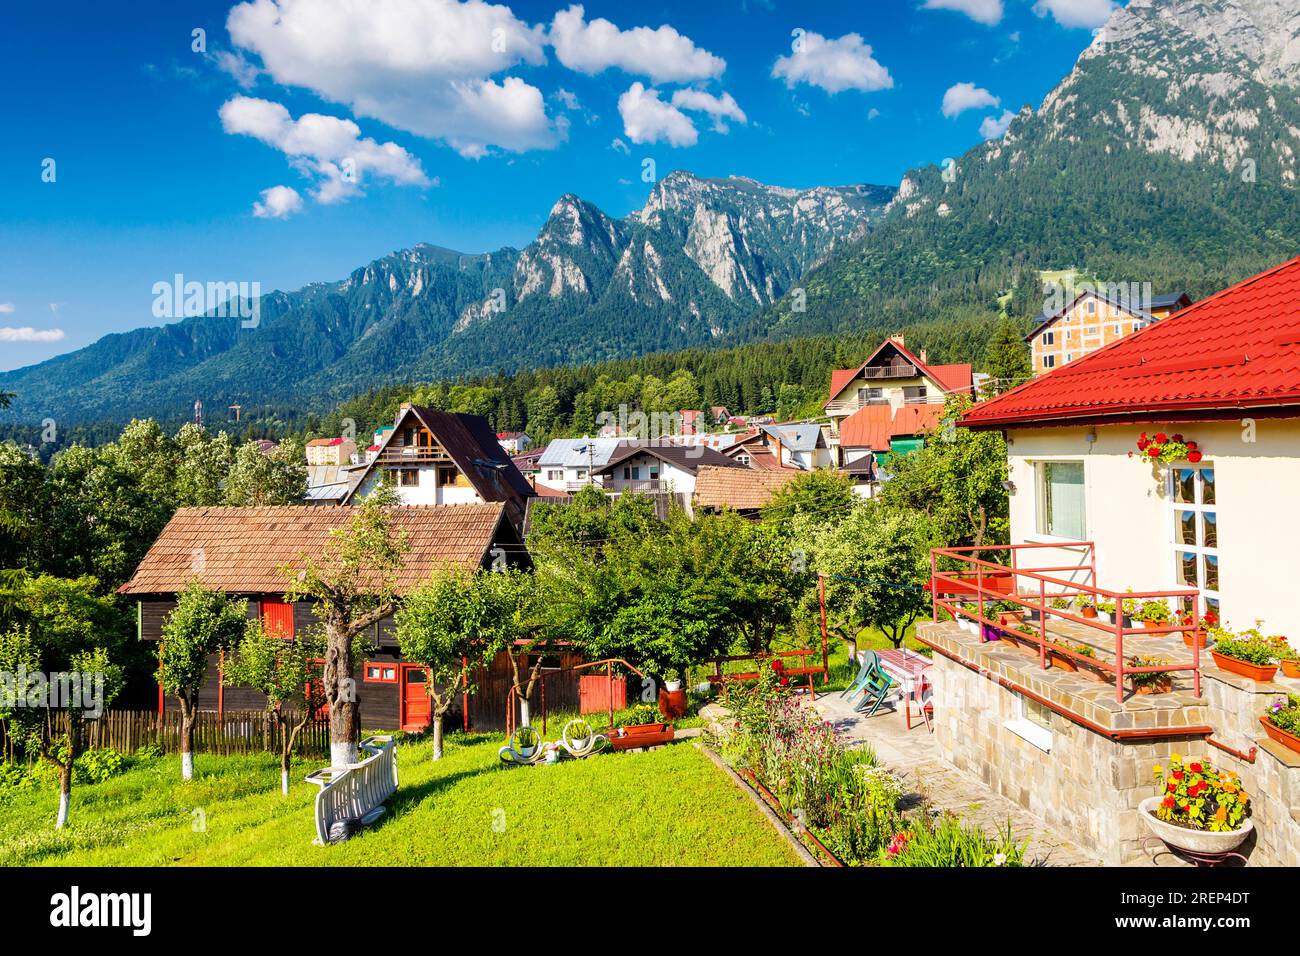 View of houses and the Bucegi Mountains from Busteni mountain village, Romania Stock Photo